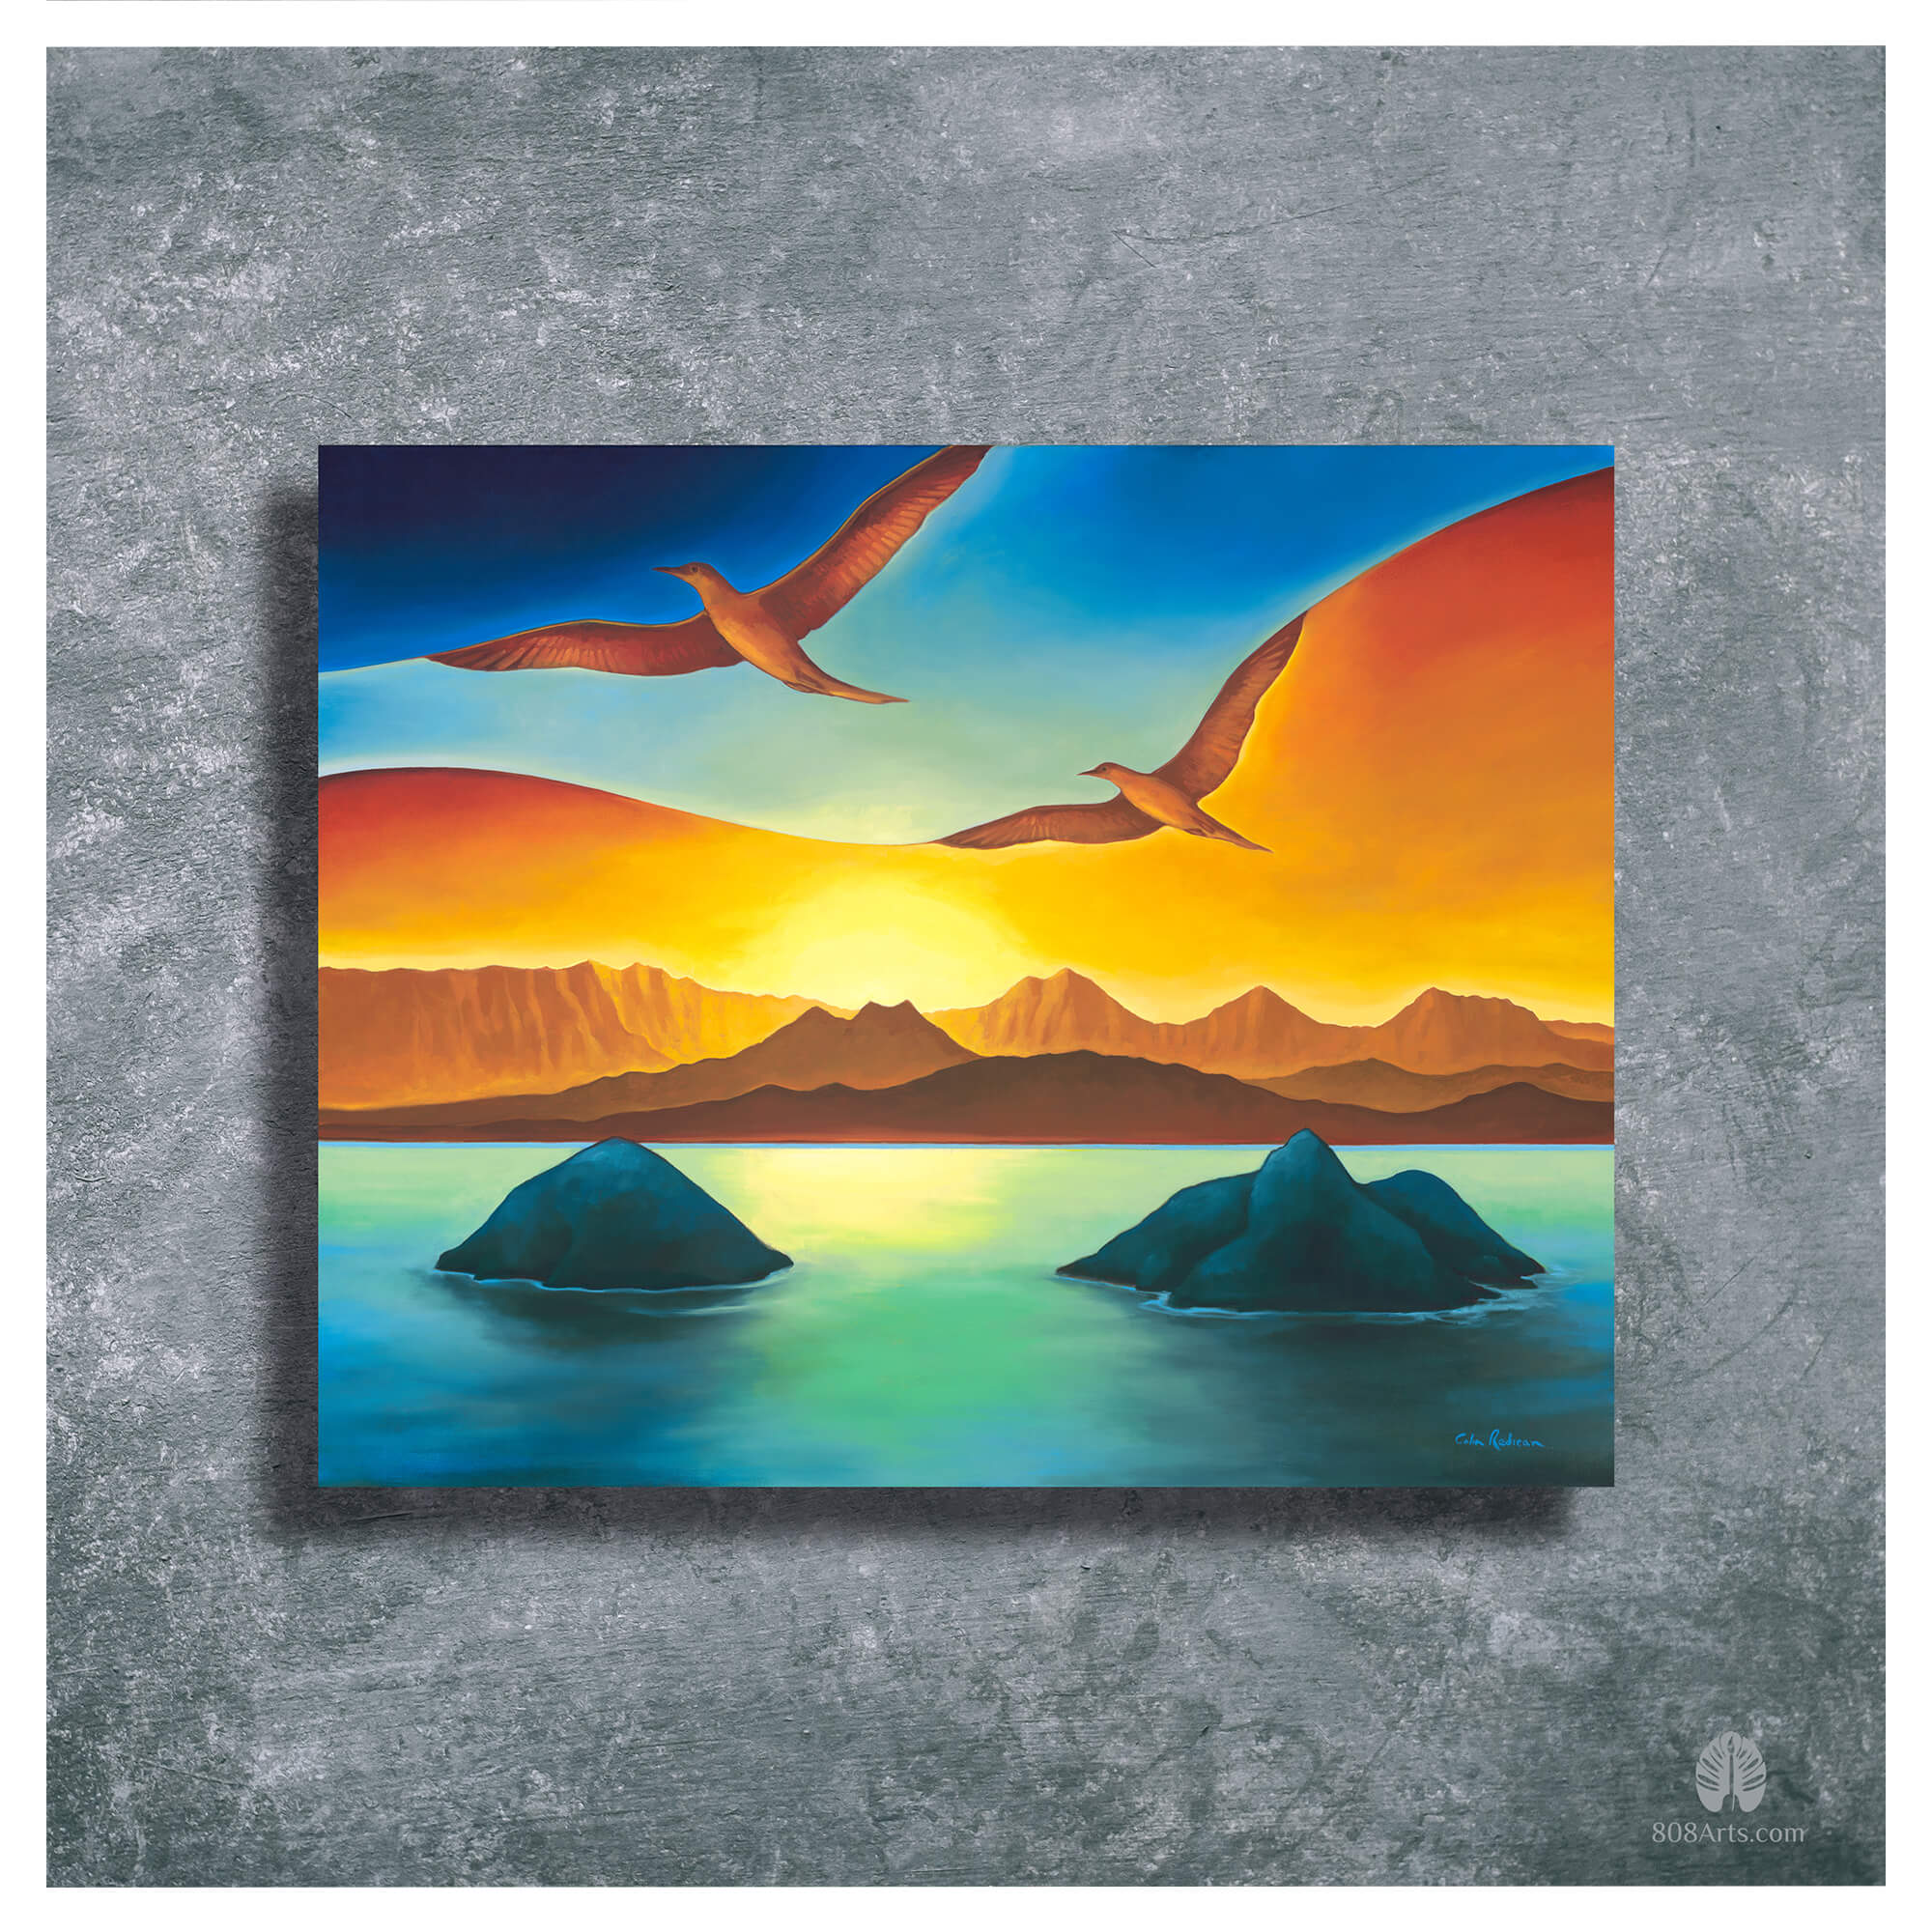 Two birds flying as the sun sets in the background by Hawaii artist Colin Redican